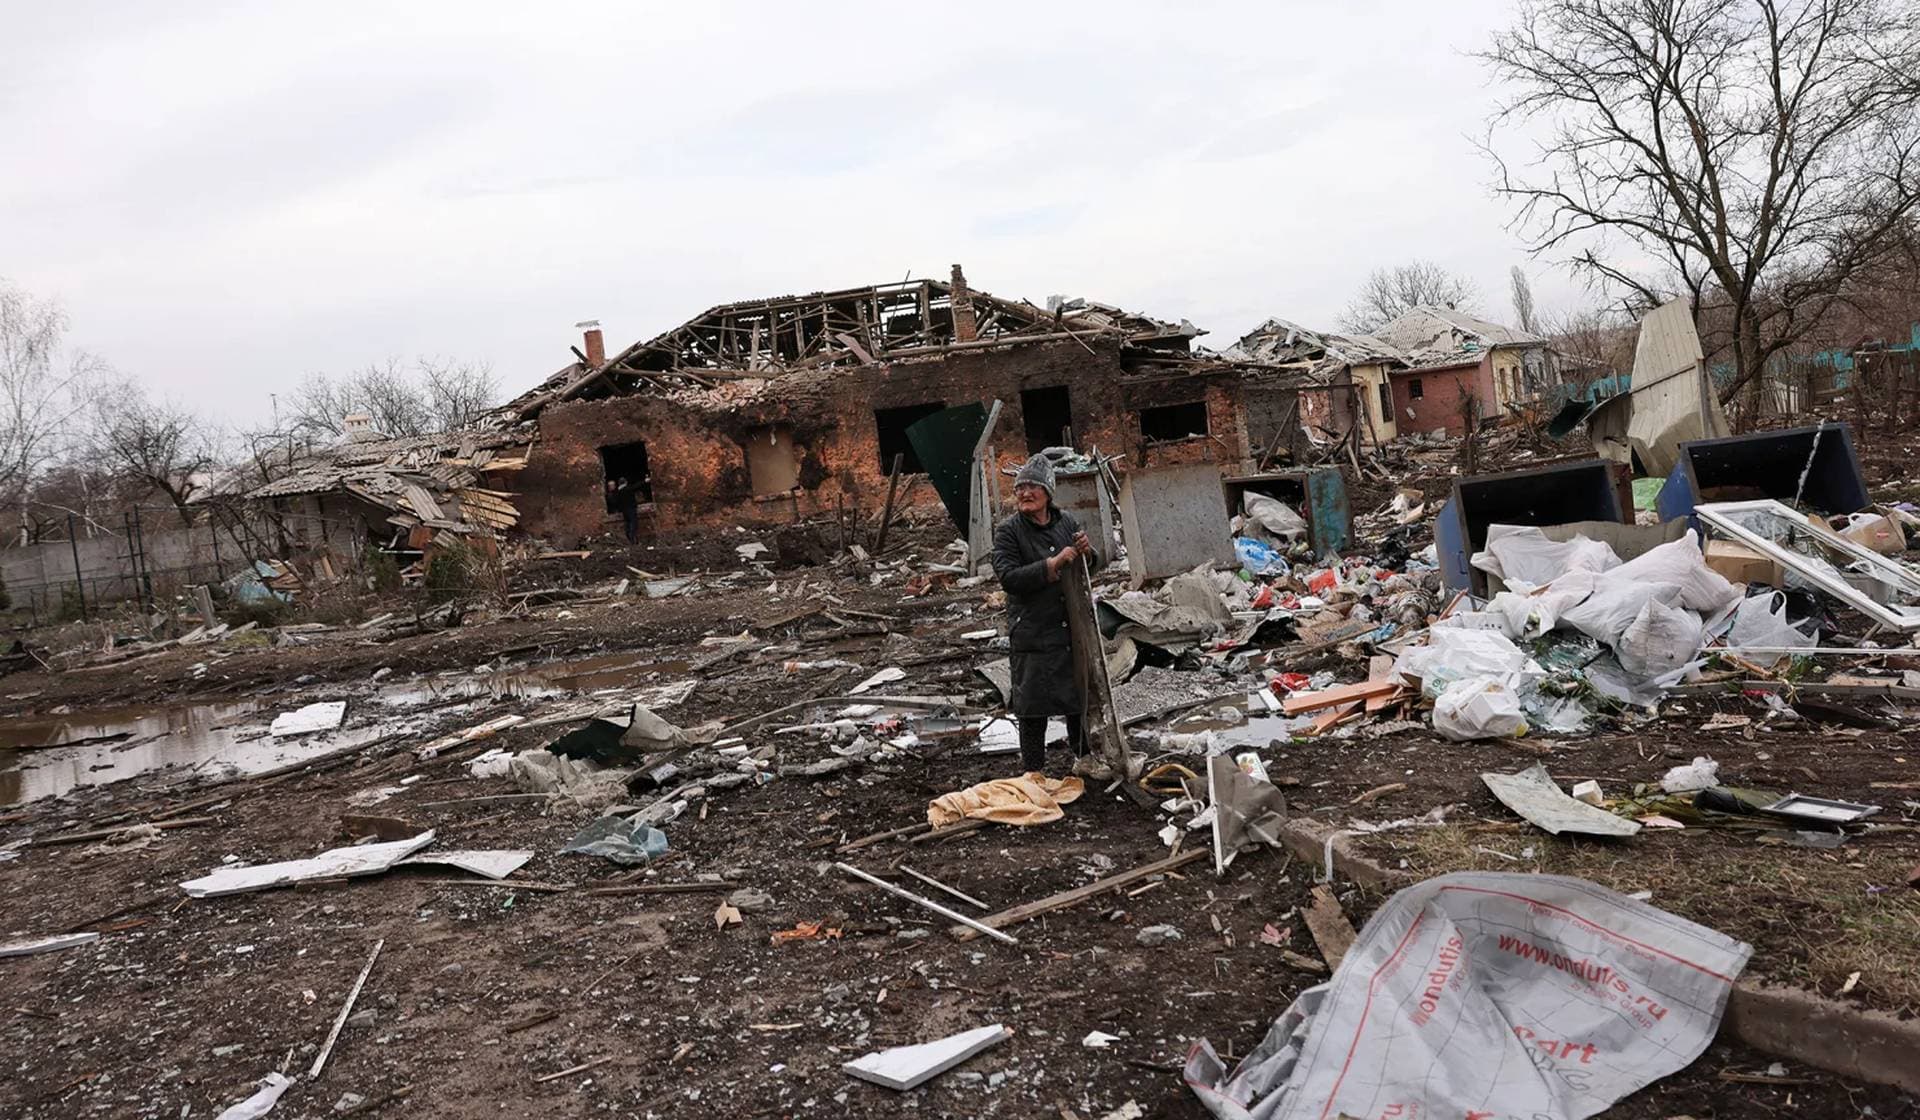 A person collects scrap metal in the aftermath of deadly shelling of residential buildings in Kostiantynivka